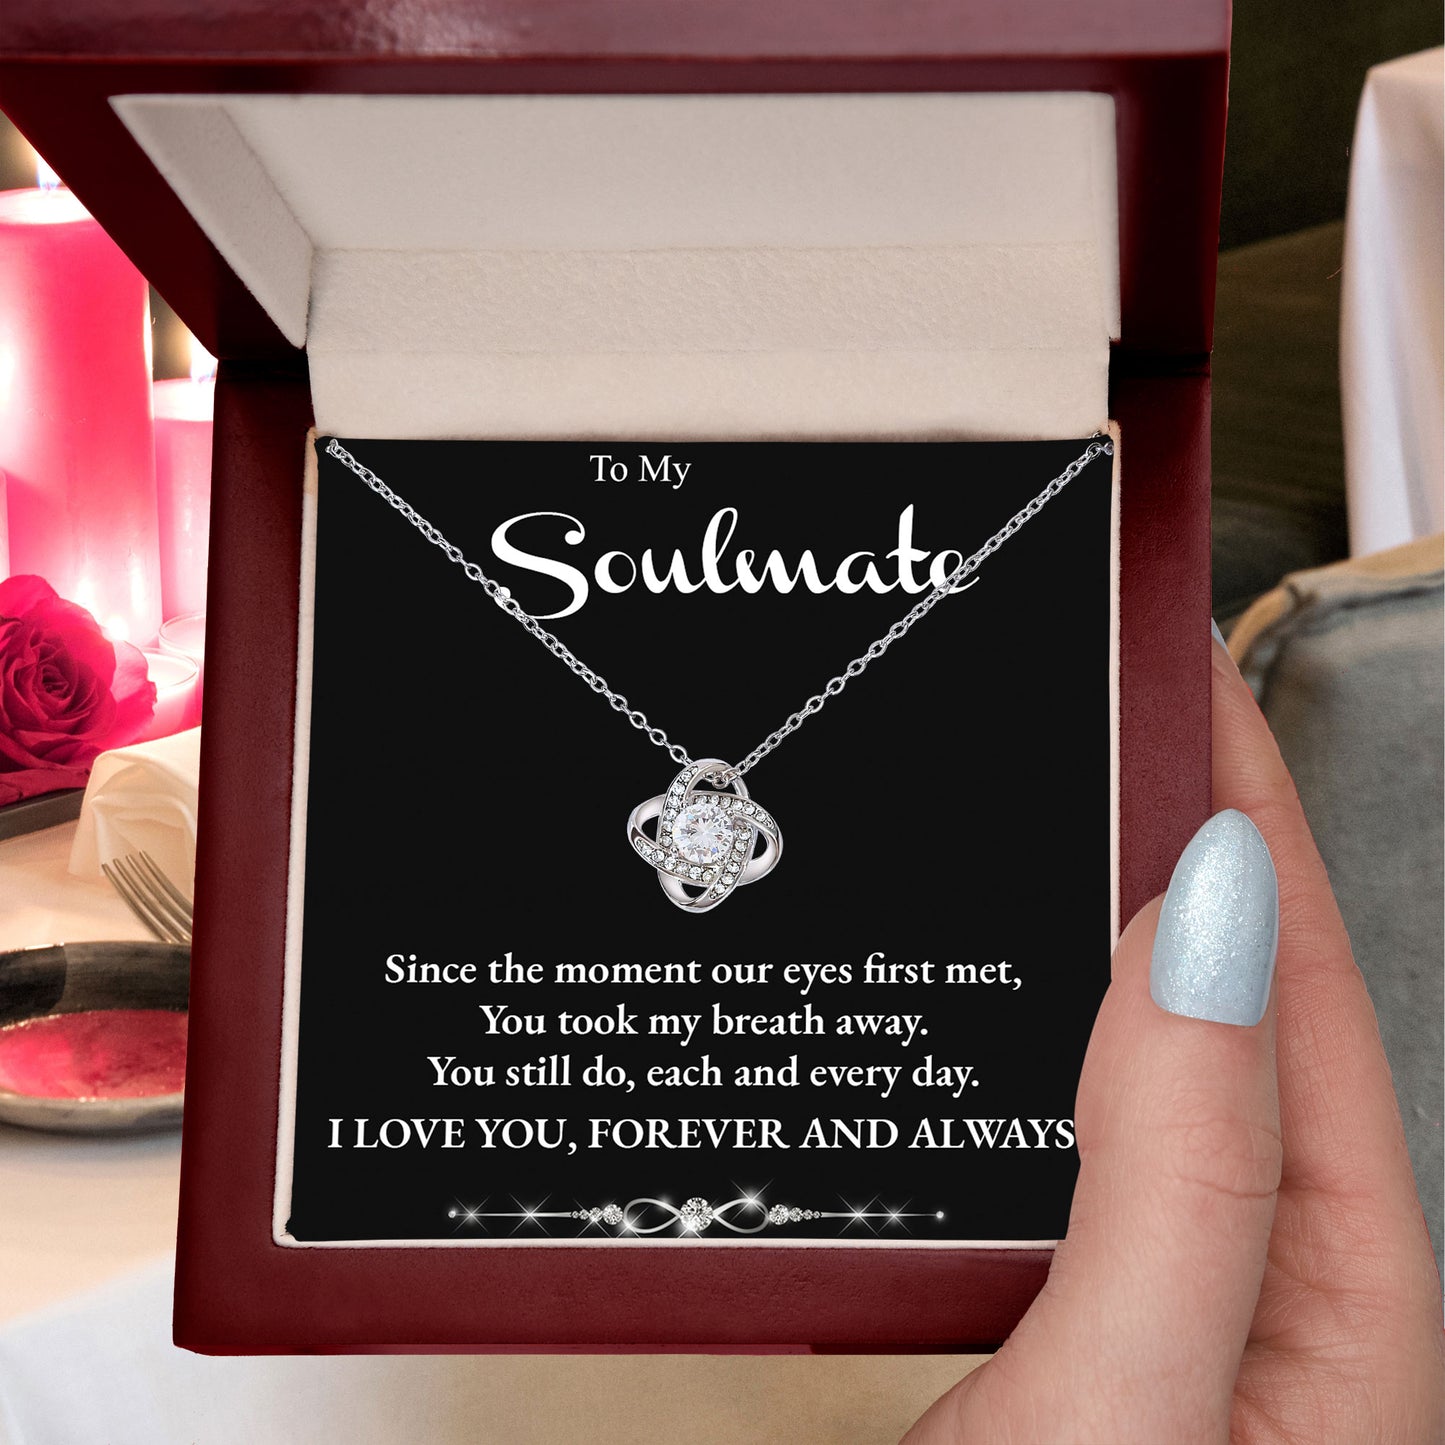 Soulmate You Took My Breath Away Love Forever and Always Pendant Necklace